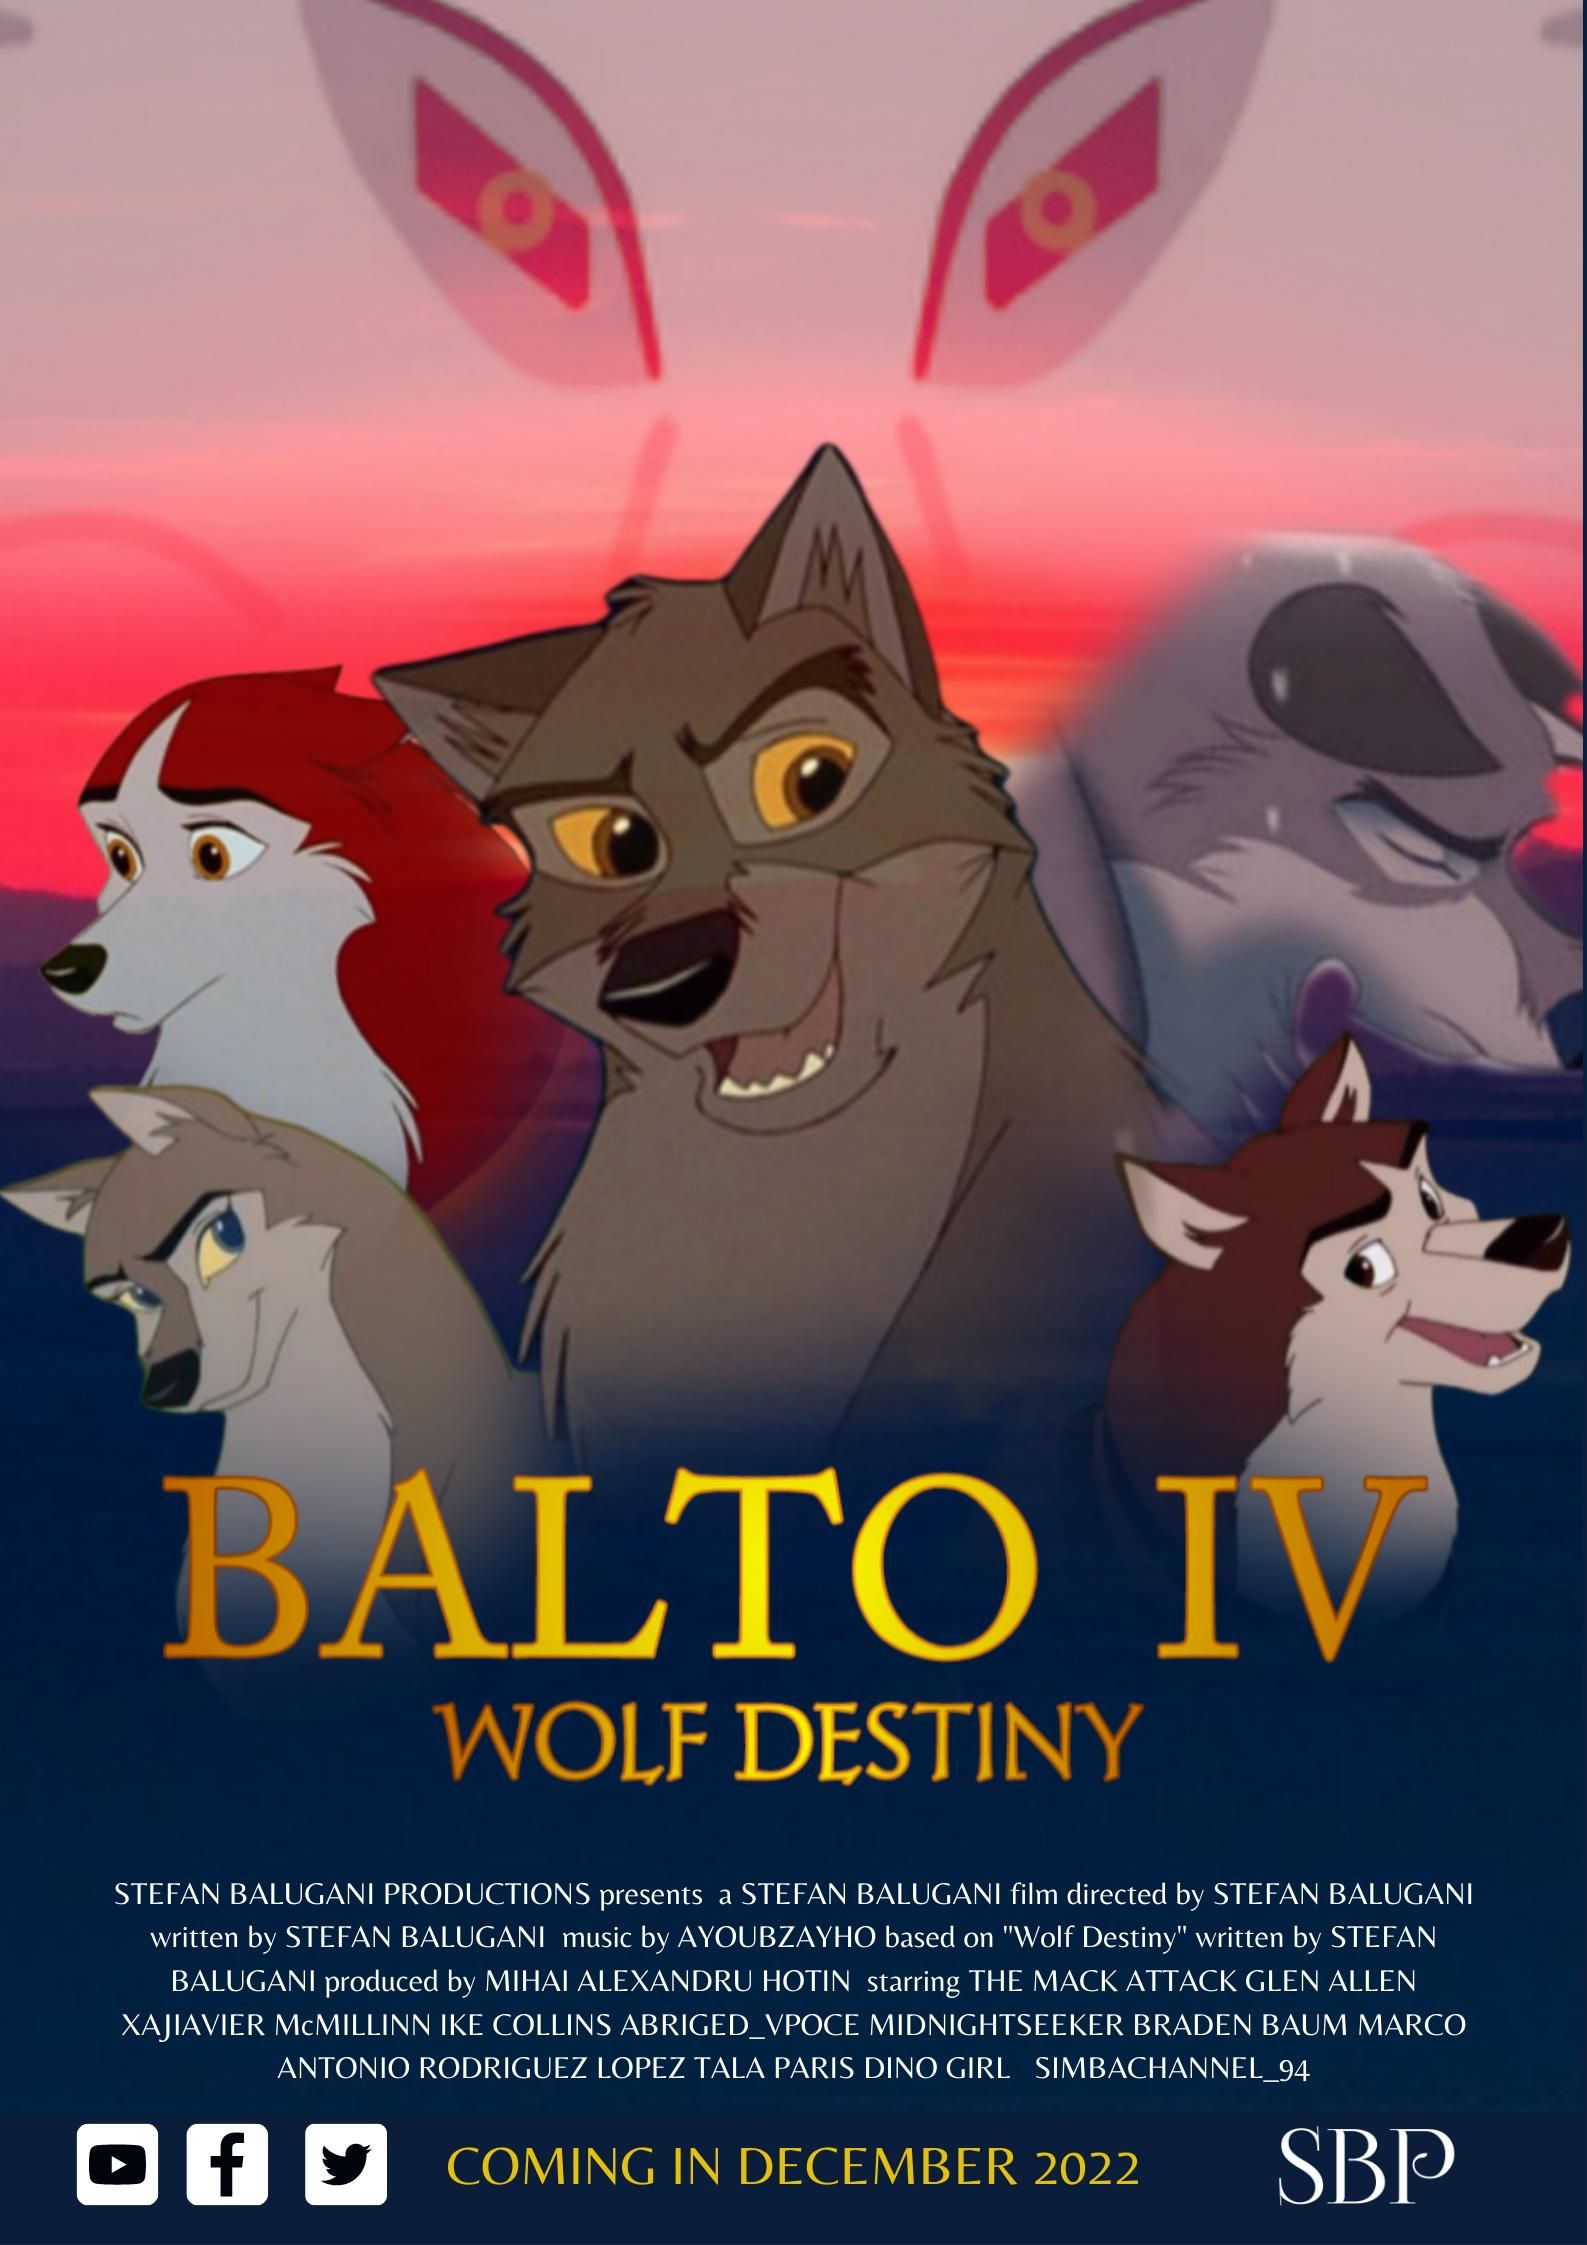 Balto IV Wolf Destiny Part One (2024) Release Date is December 25